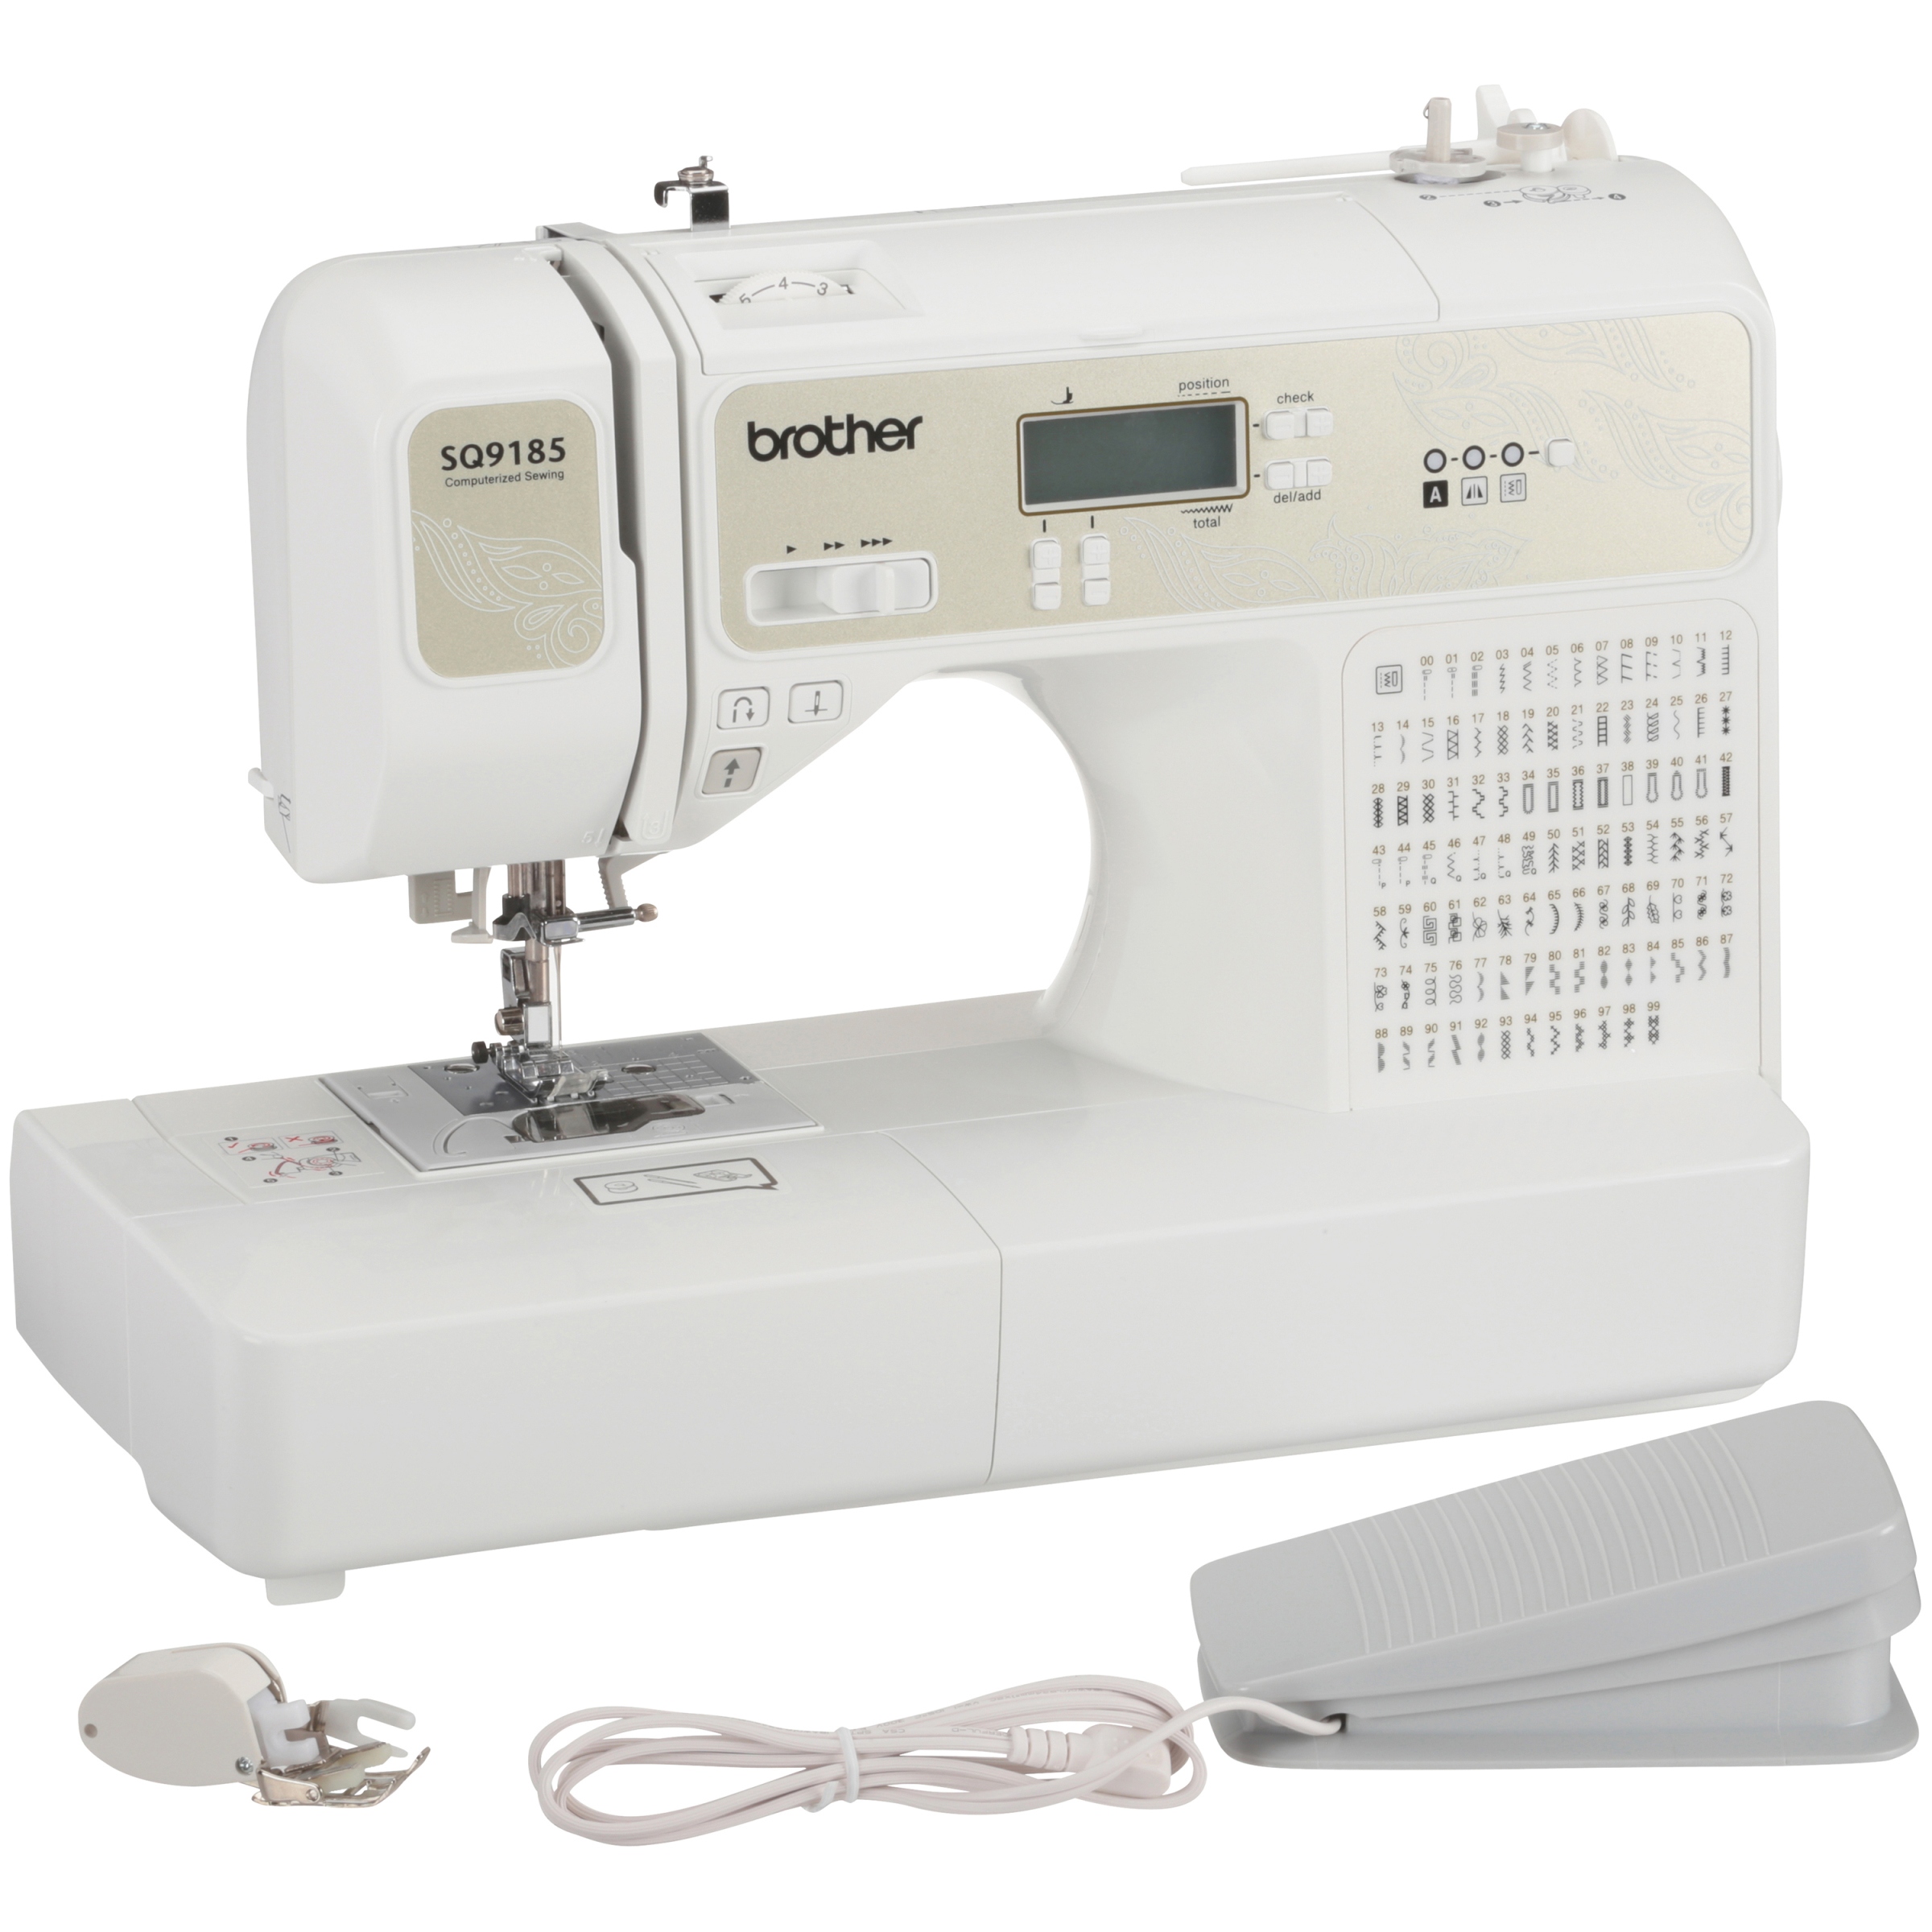 Restored Brother RSQ9185 Computerized Sewing & Quilting Machine Box (Refurbished) - image 3 of 7